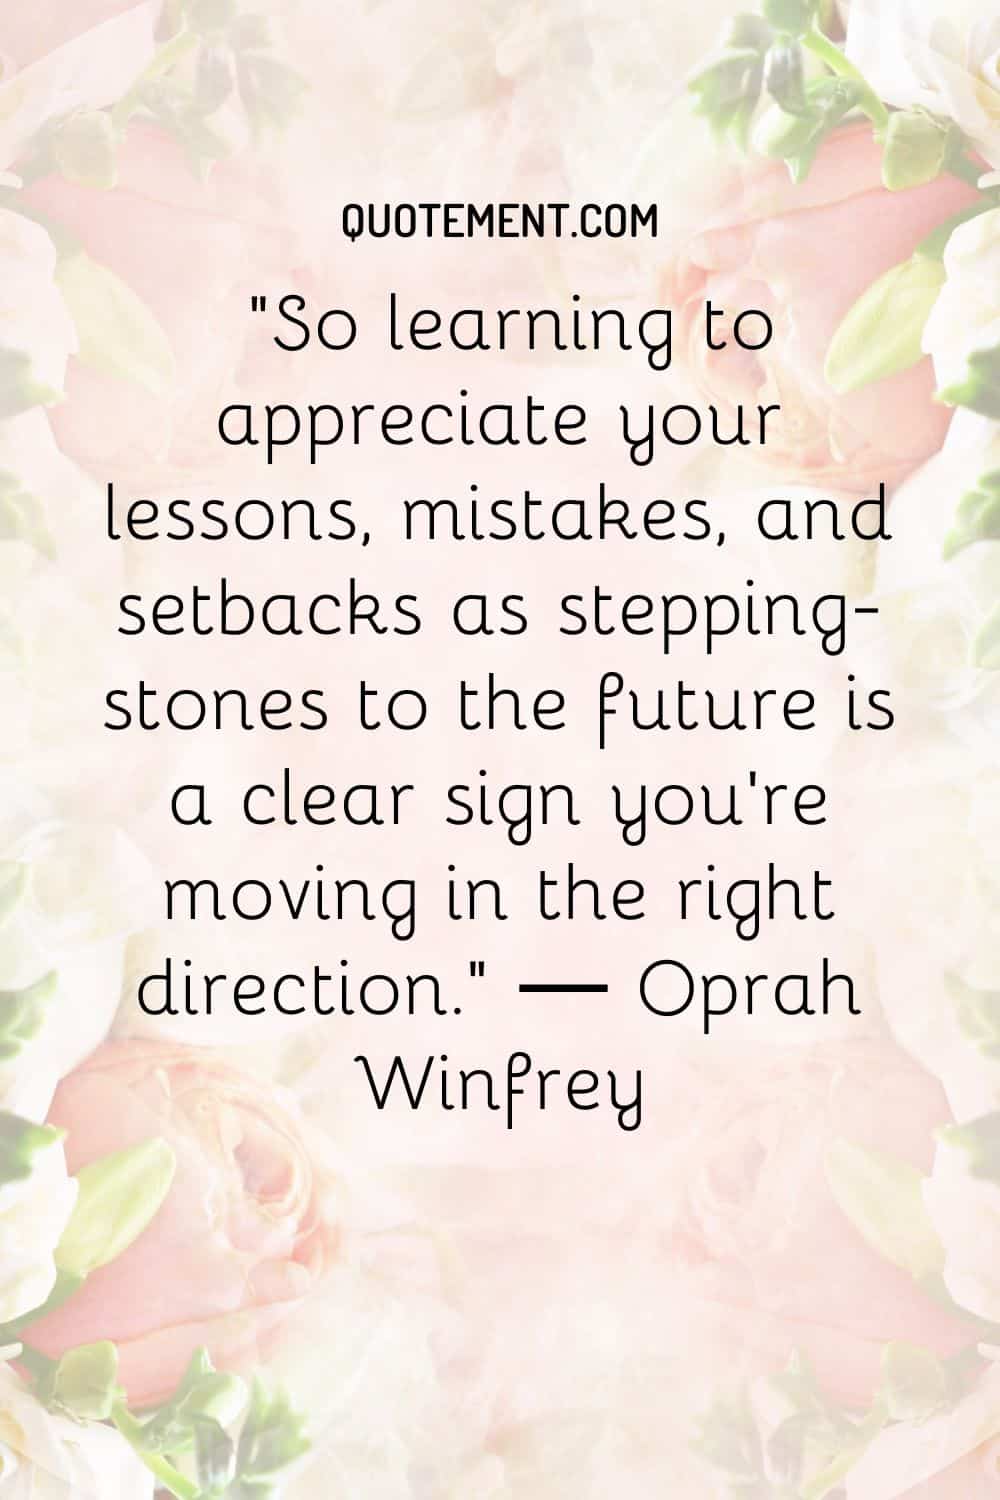 So learning to appreciate your lessons, mistakes, and setbacks as stepping-stones to the future is a clear sign you’re moving in the right direction